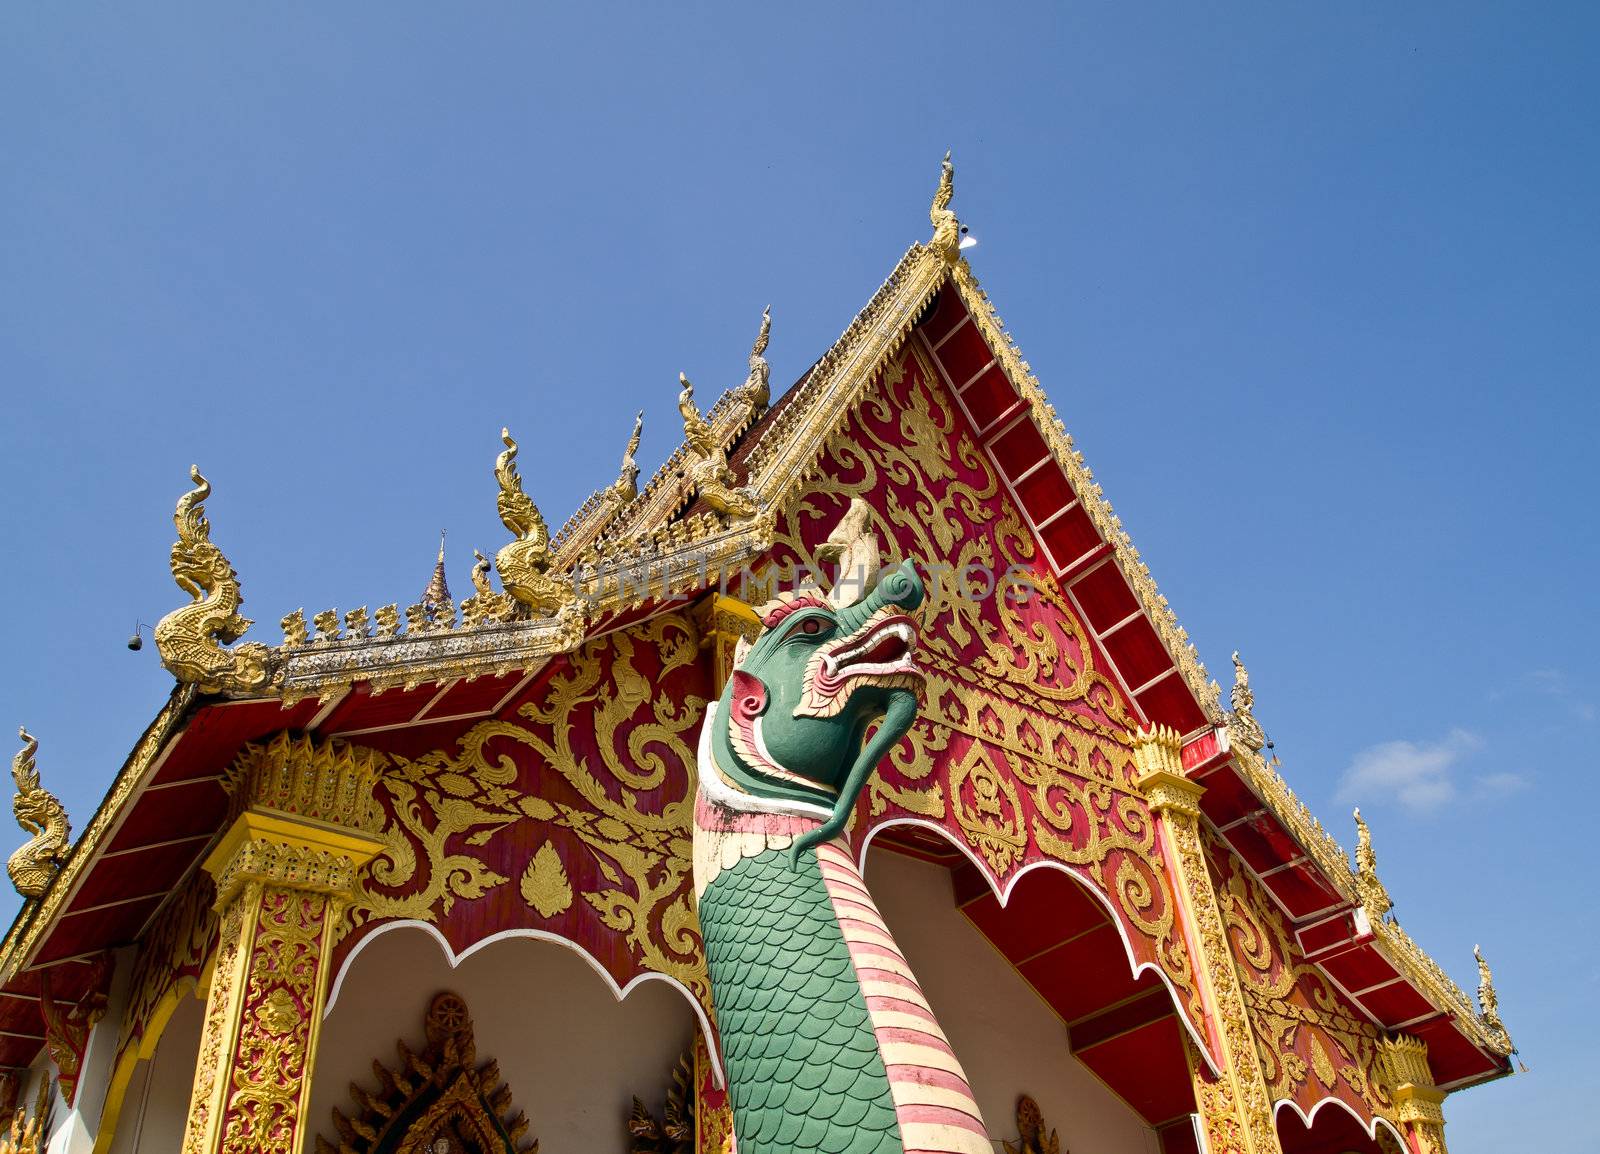 Temple in Traditional lanna style which is in Wat Suantan (Nan-Thailand)